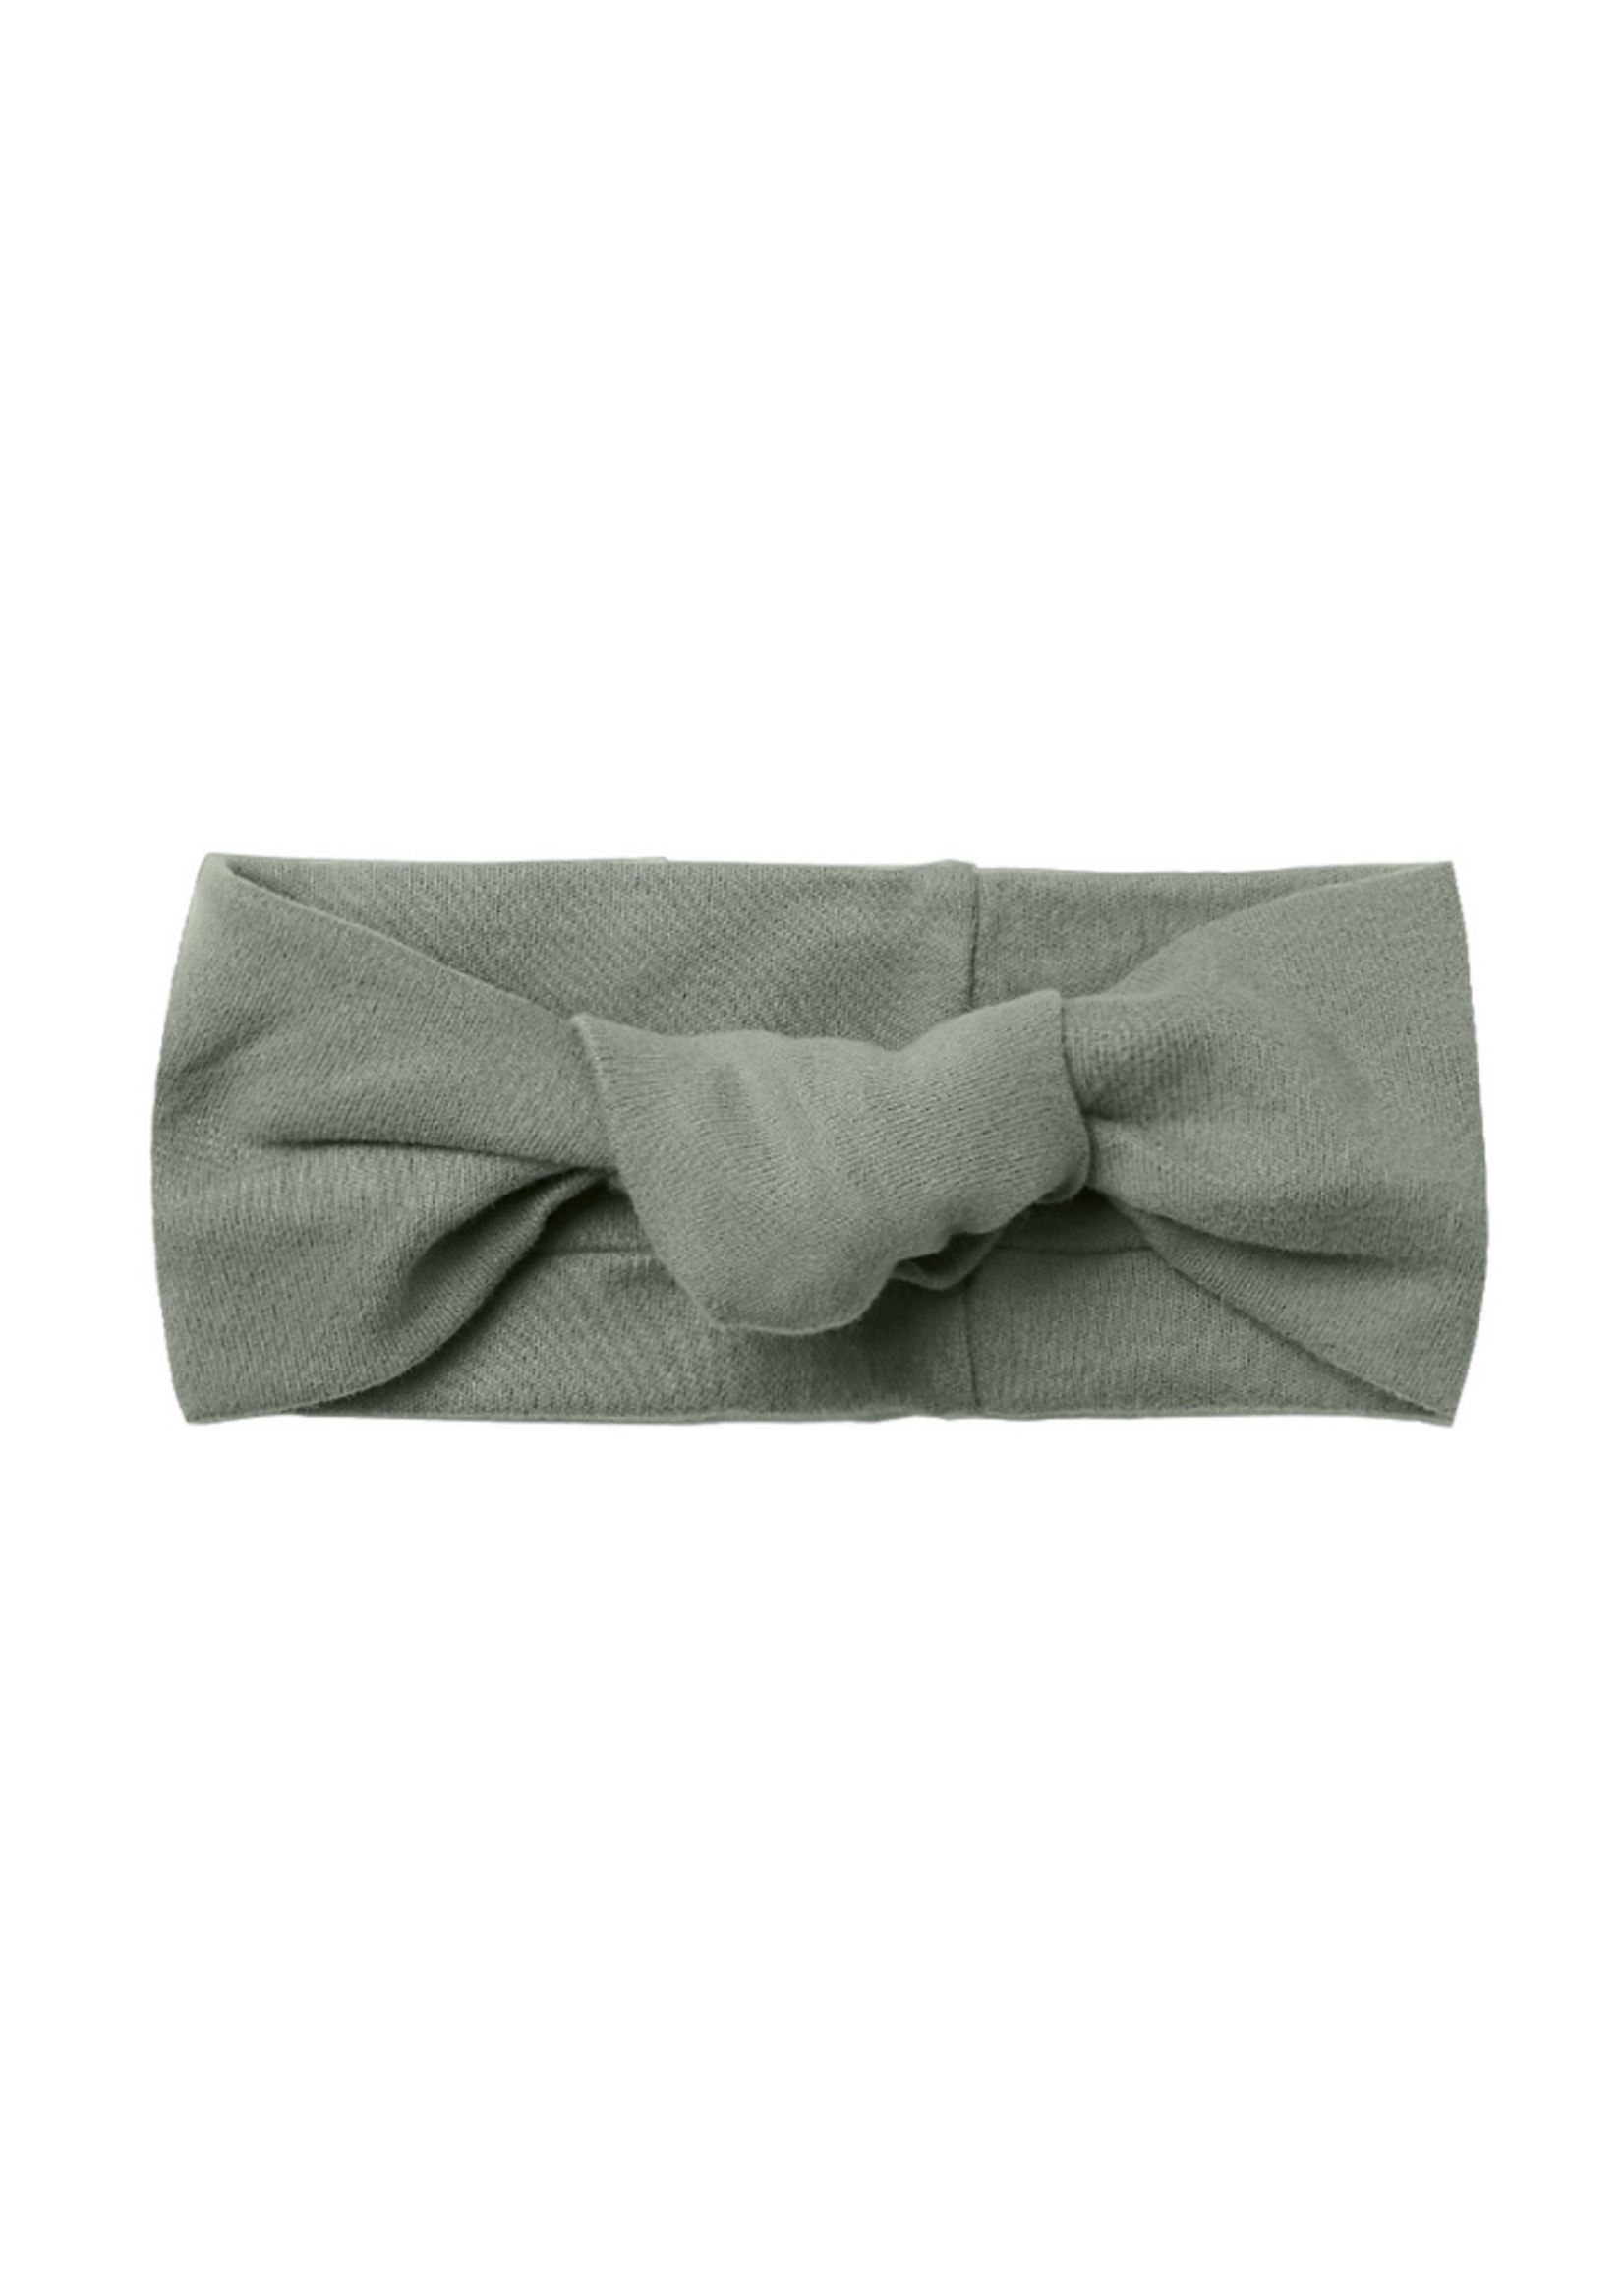 Quincy Mae Basil Knotted Headband